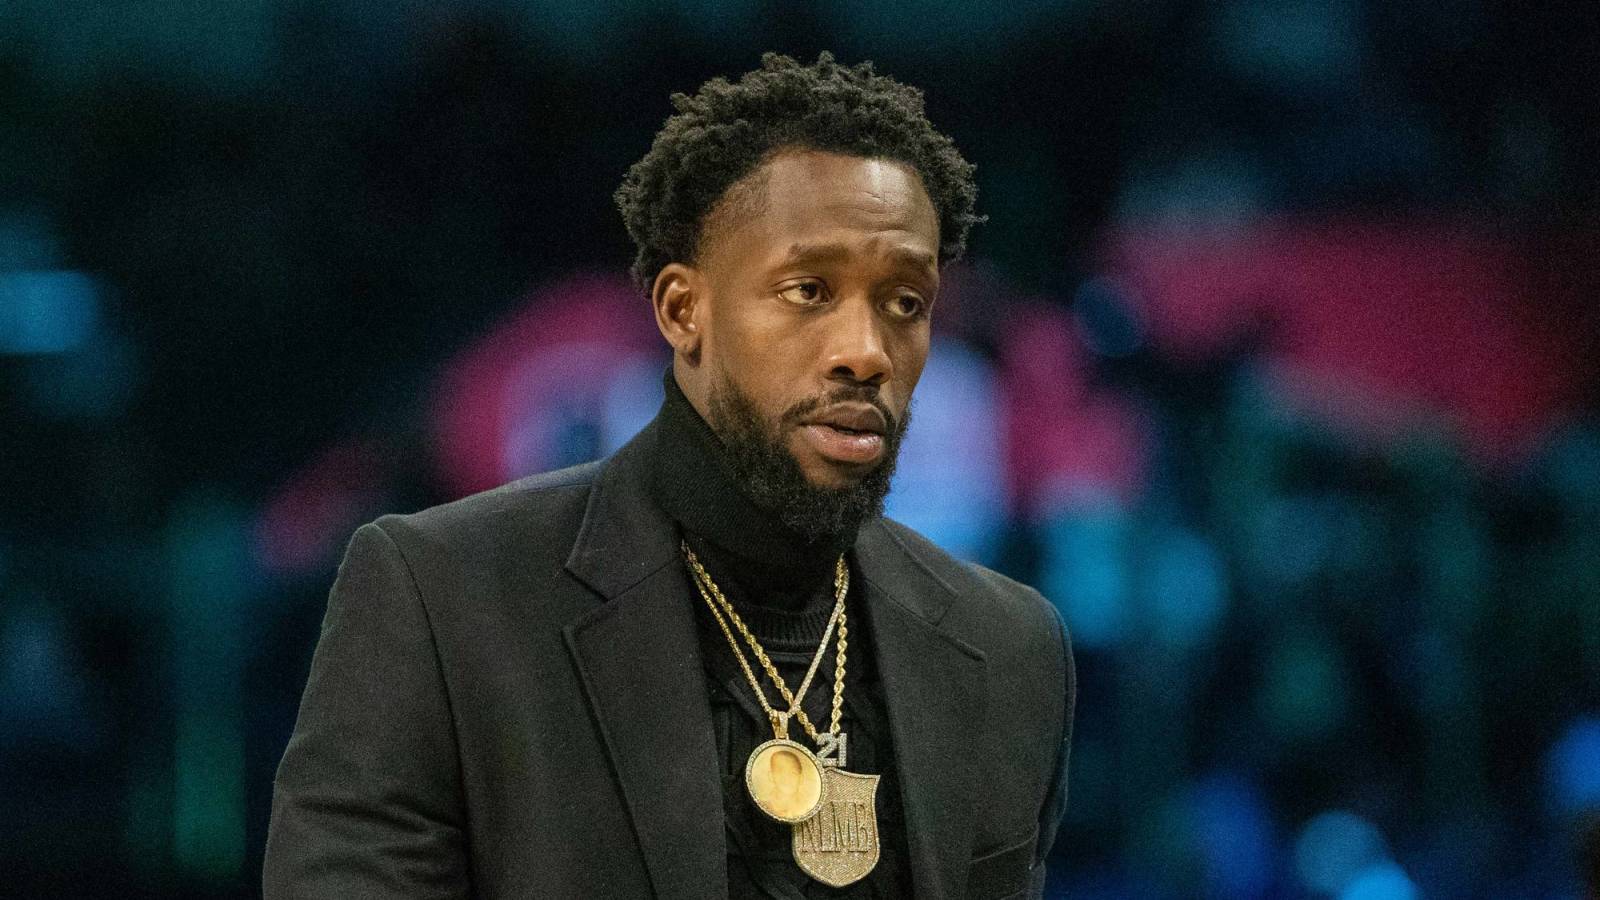 Patrick Beverley's Girlfriend Posts Pics On Instagram After Timberwolves  Beat Clippers, Congratulating Her Boyfriend For Making The NBA Playoffs -  Fadeaway World